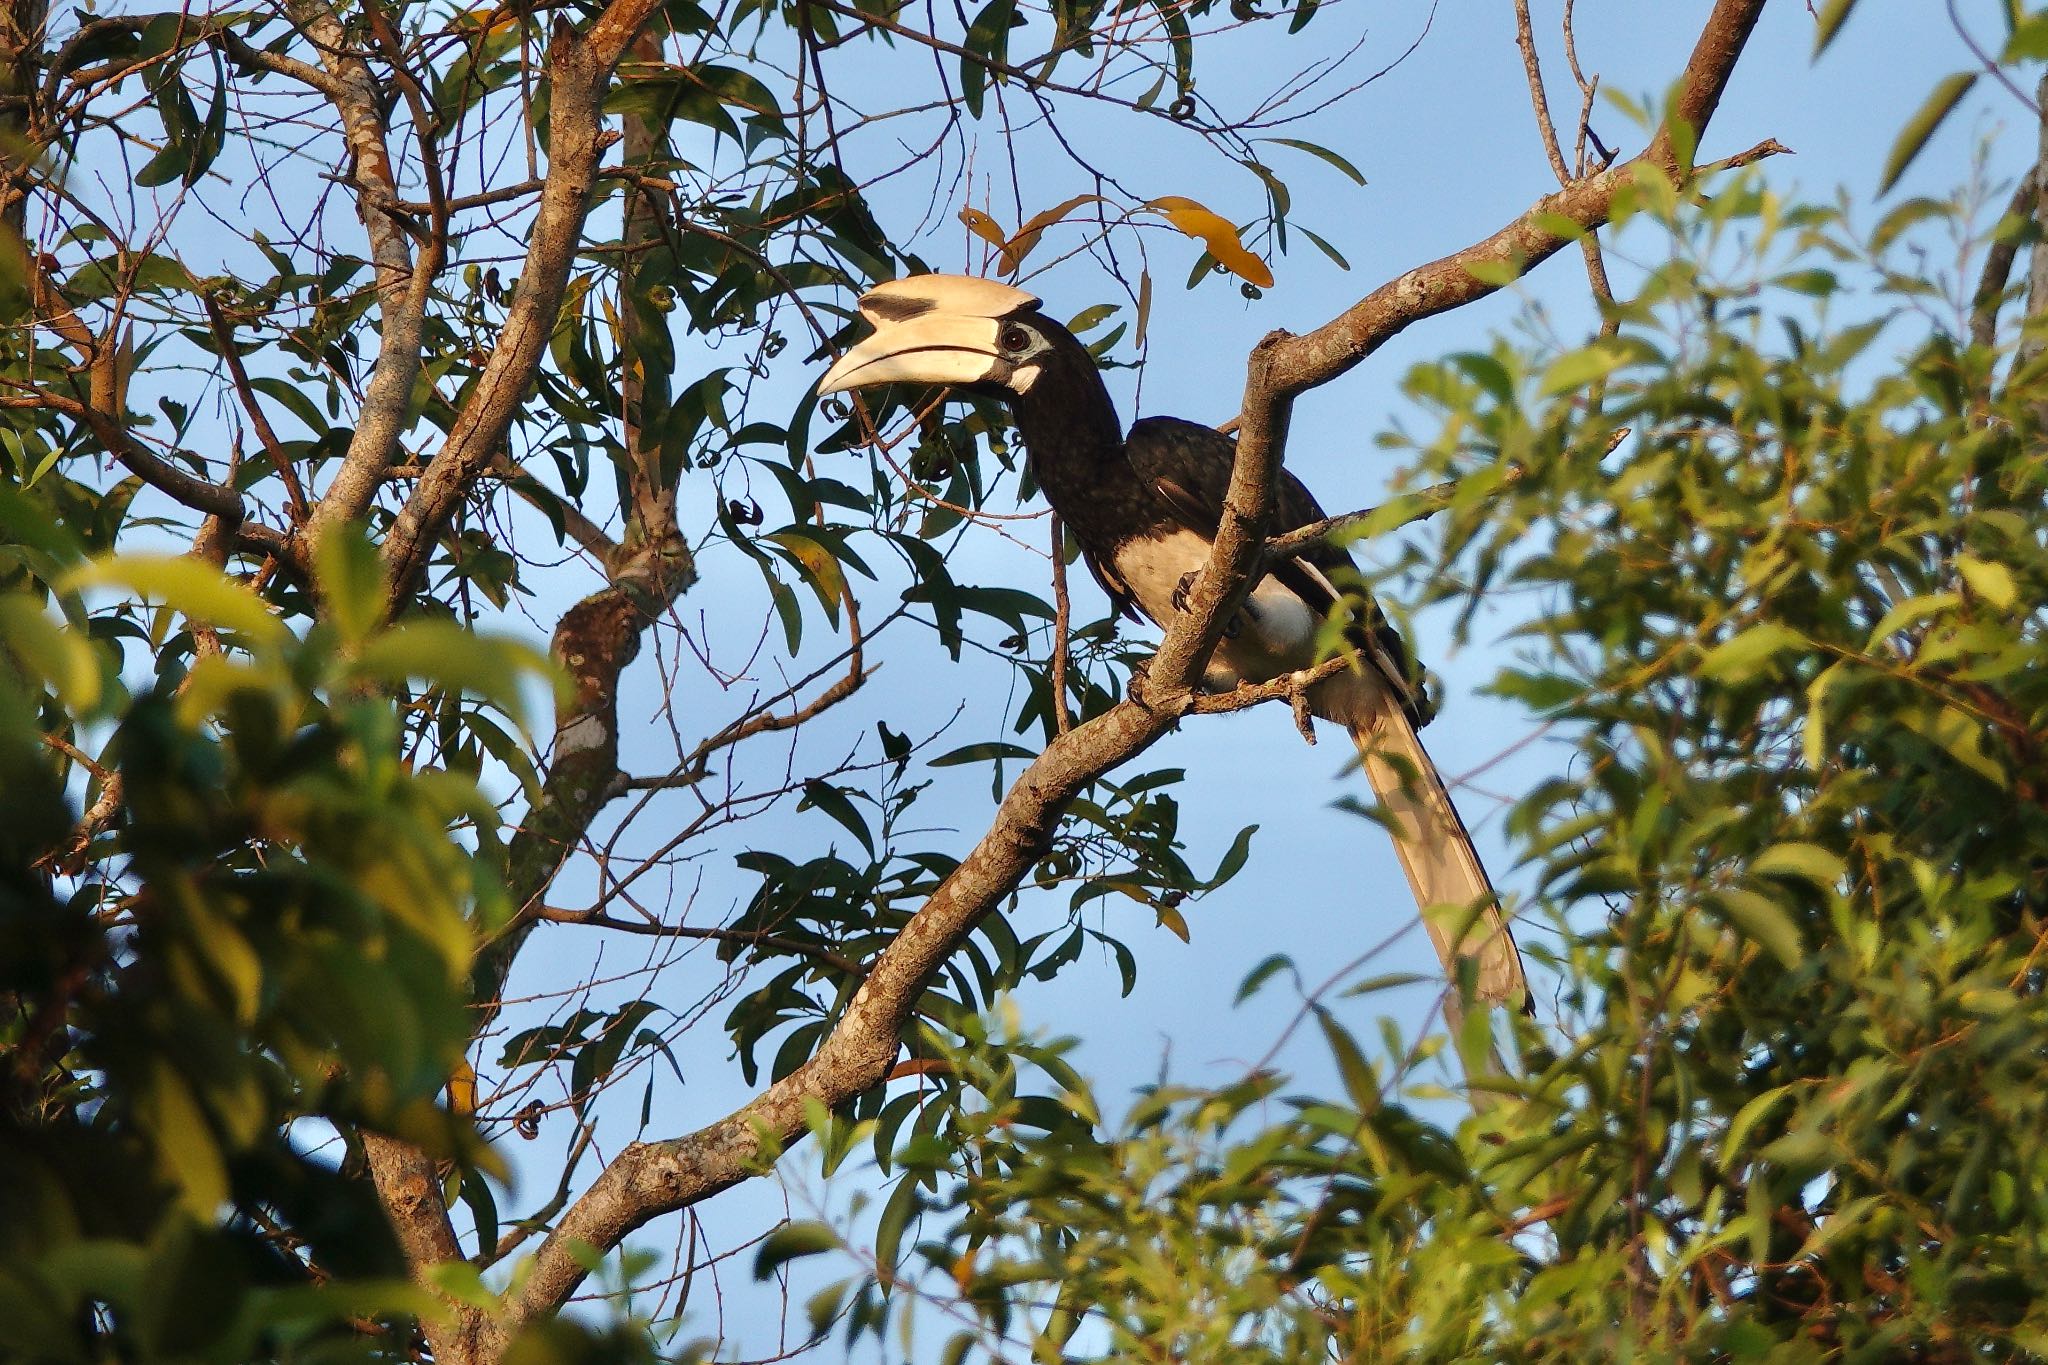 Photo of Oriental Pied Hornbill at Pasir Ris Park (Singapore) by のどか